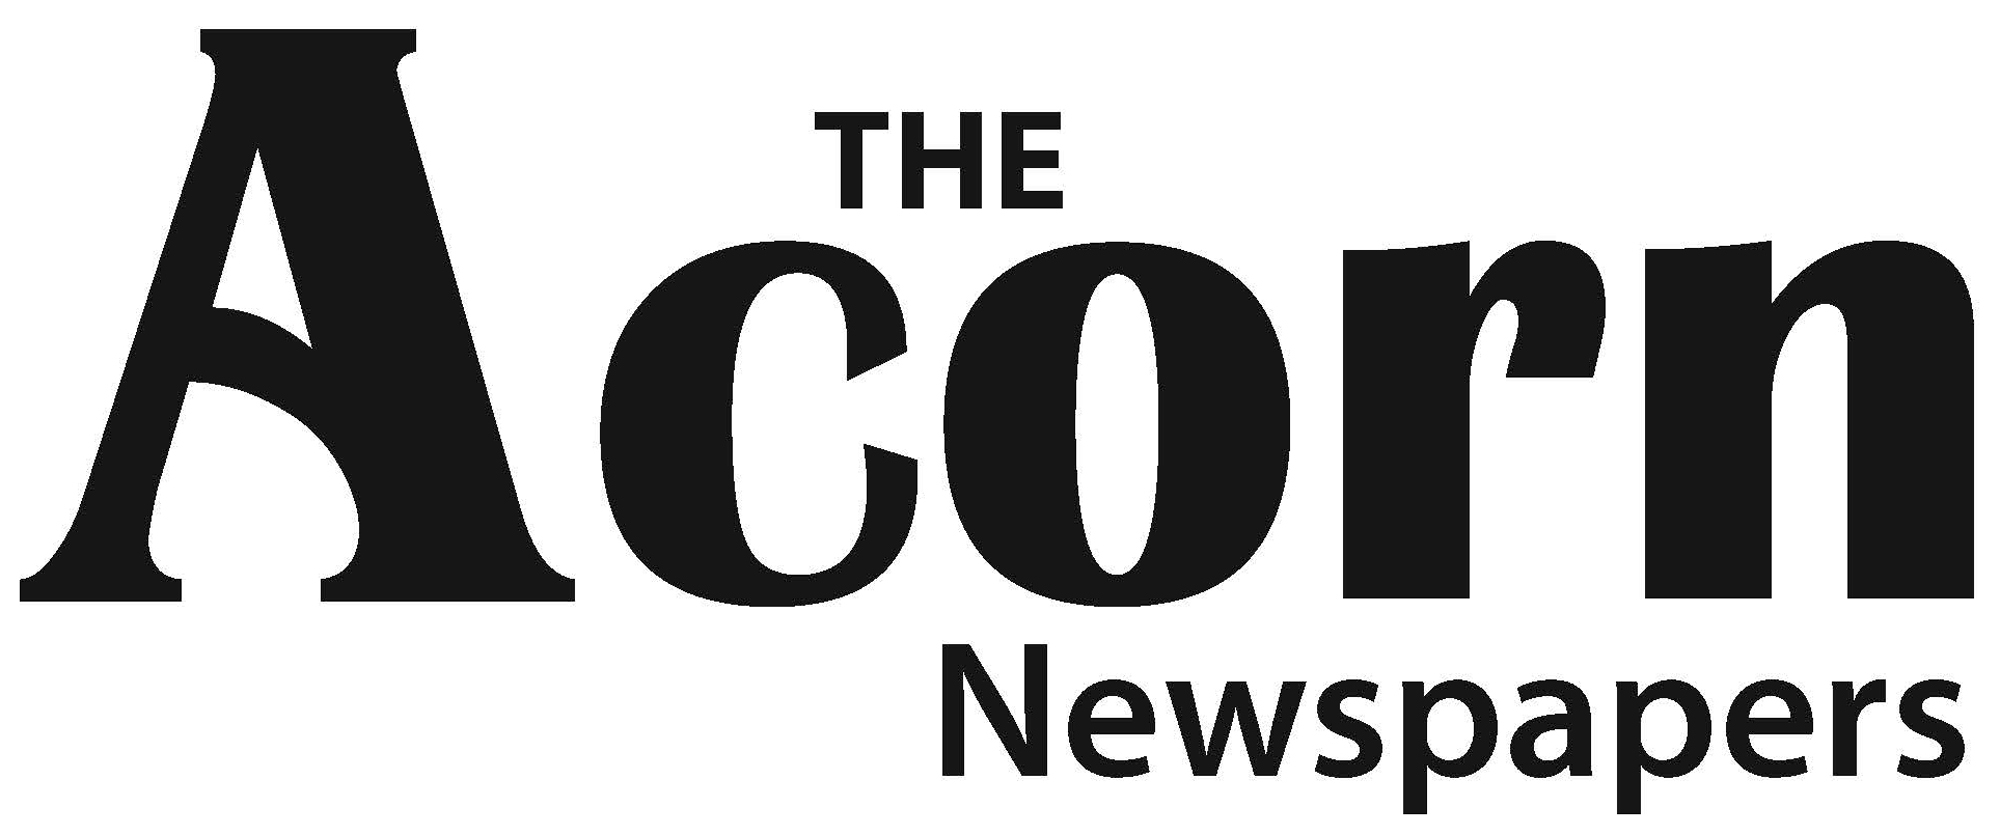 The Acorn Newspapers